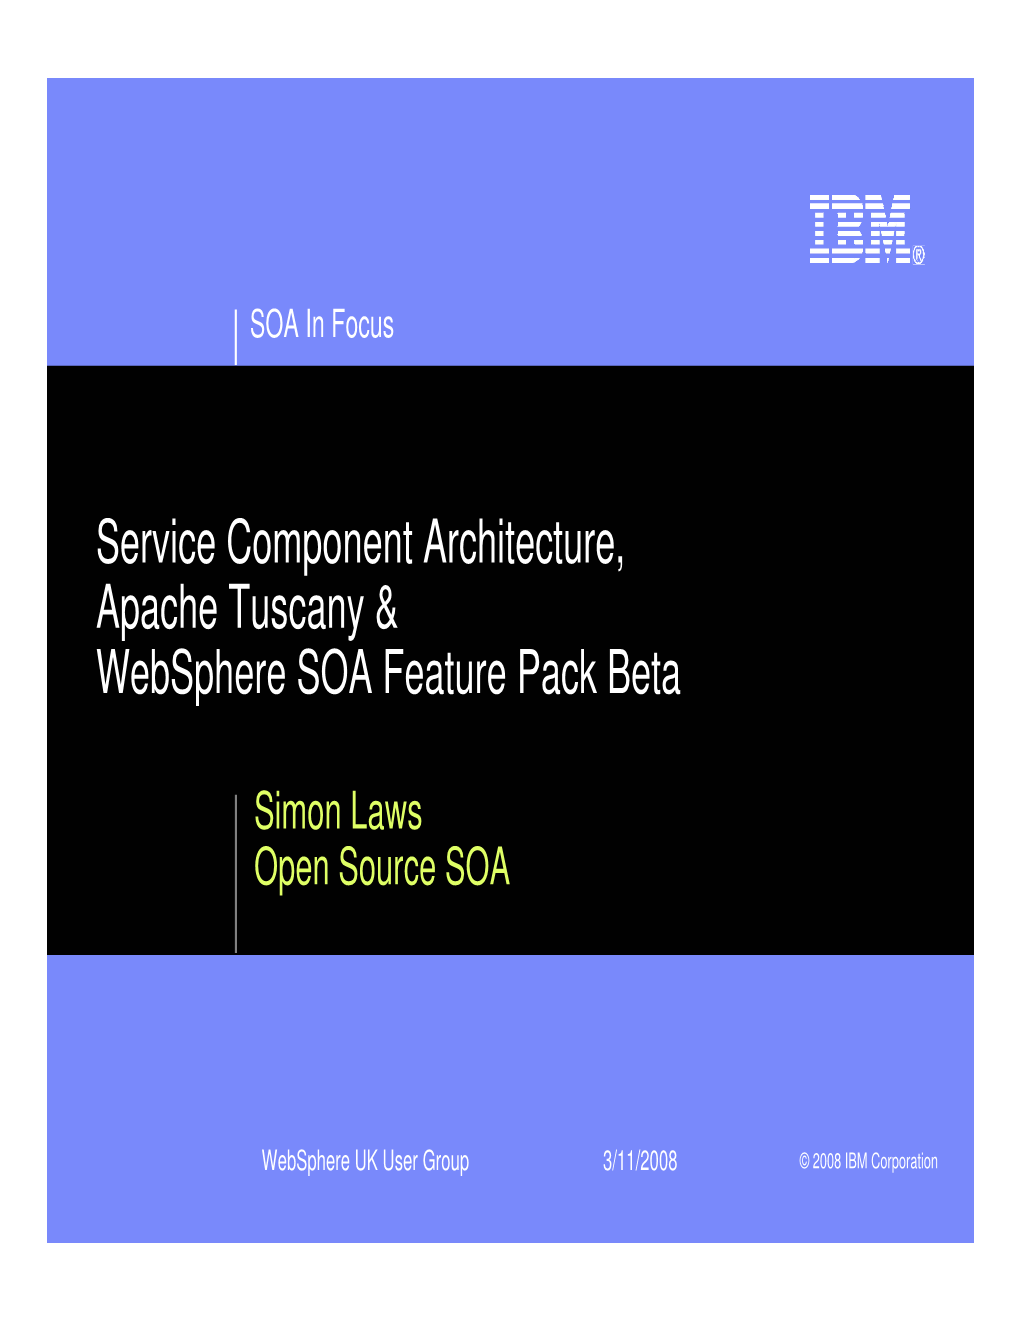 Service Component Architecture, Apache Tuscany & Websphere